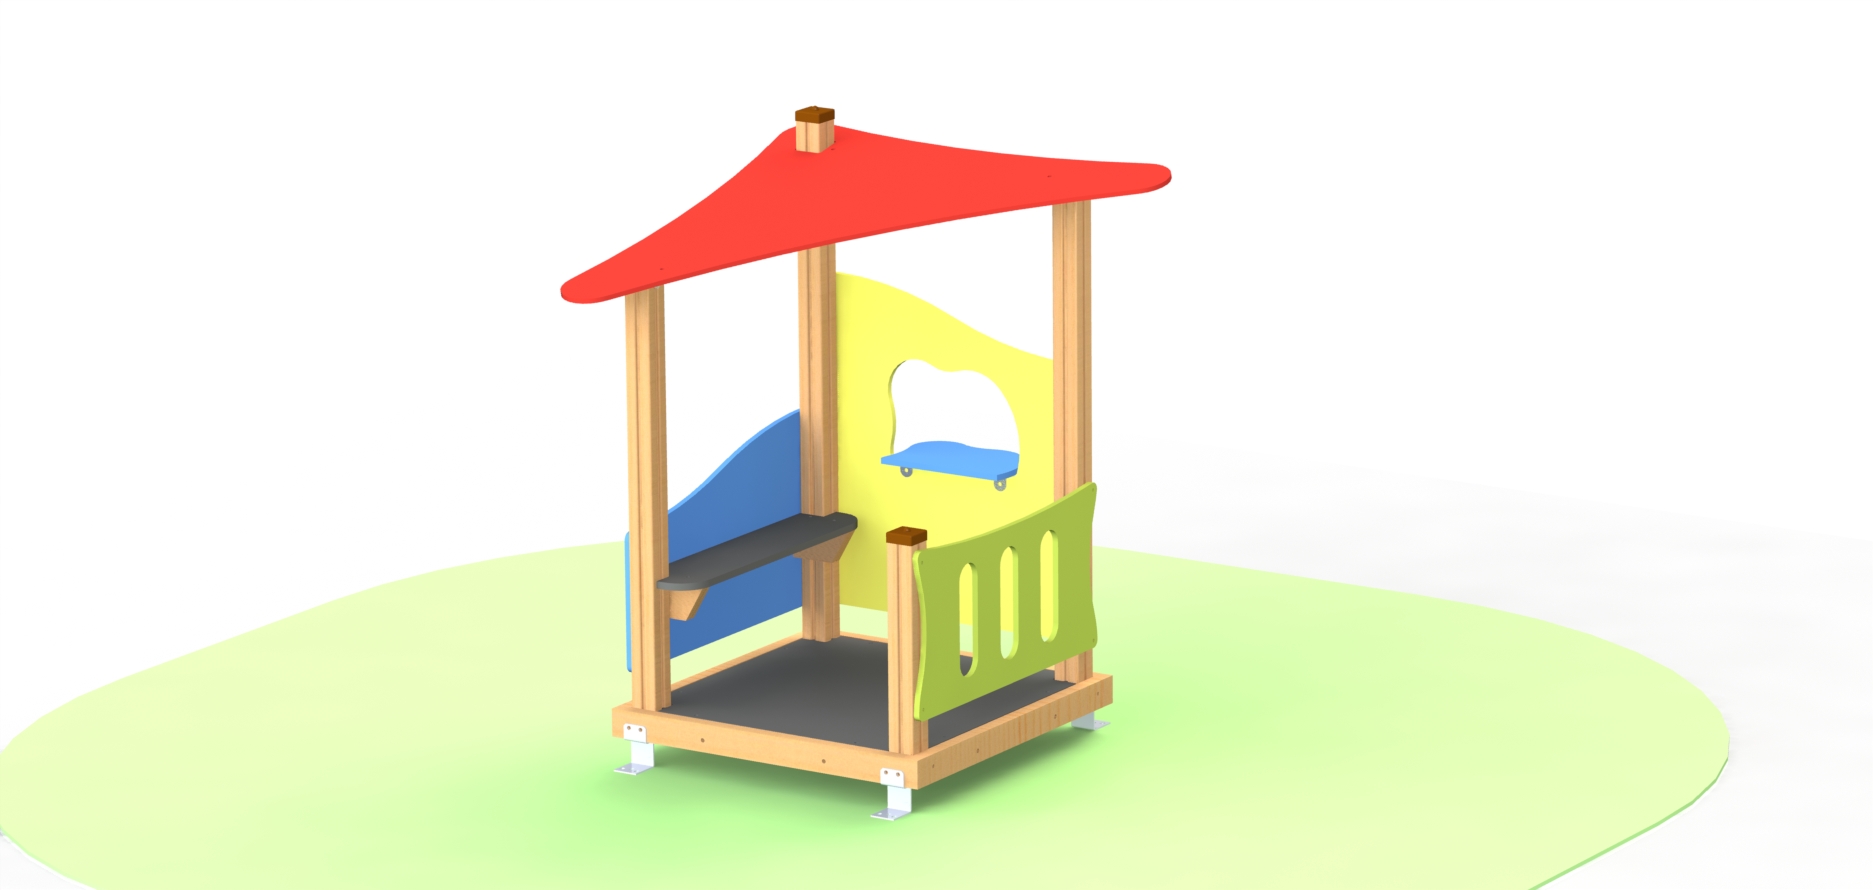 Product photo: Children play house with benches, Б28 model